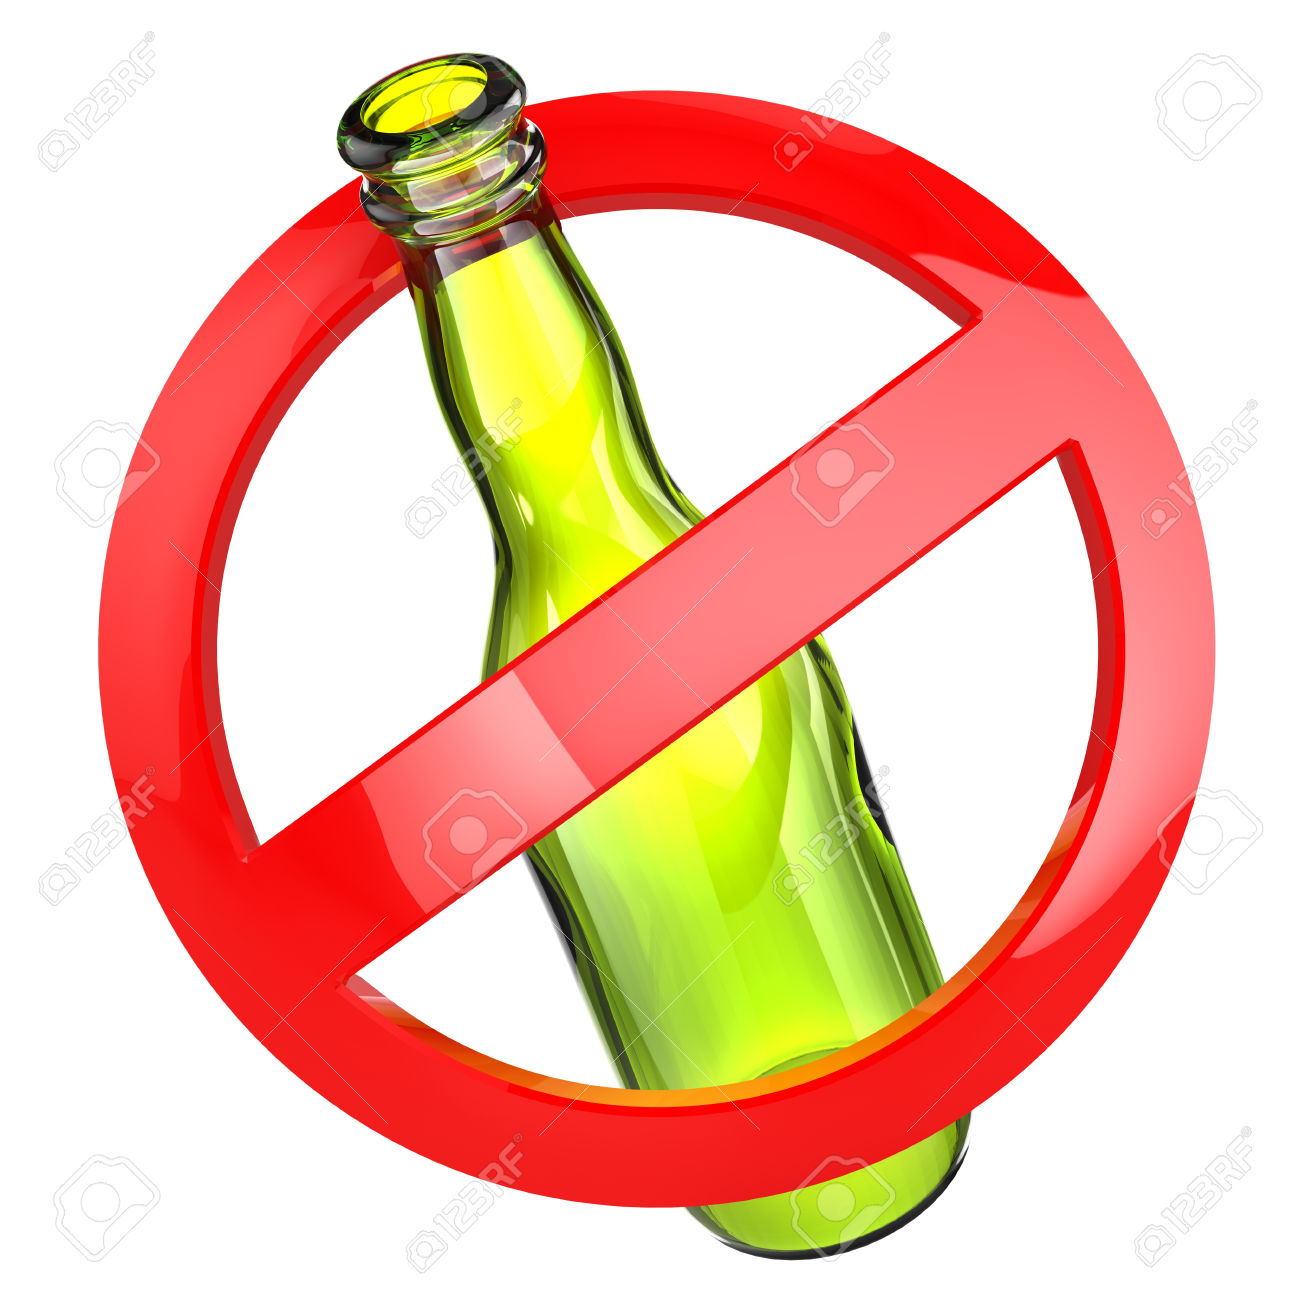 32939568 Stop alcohol or No glass sign Bottle on white isolated background Stock Photo